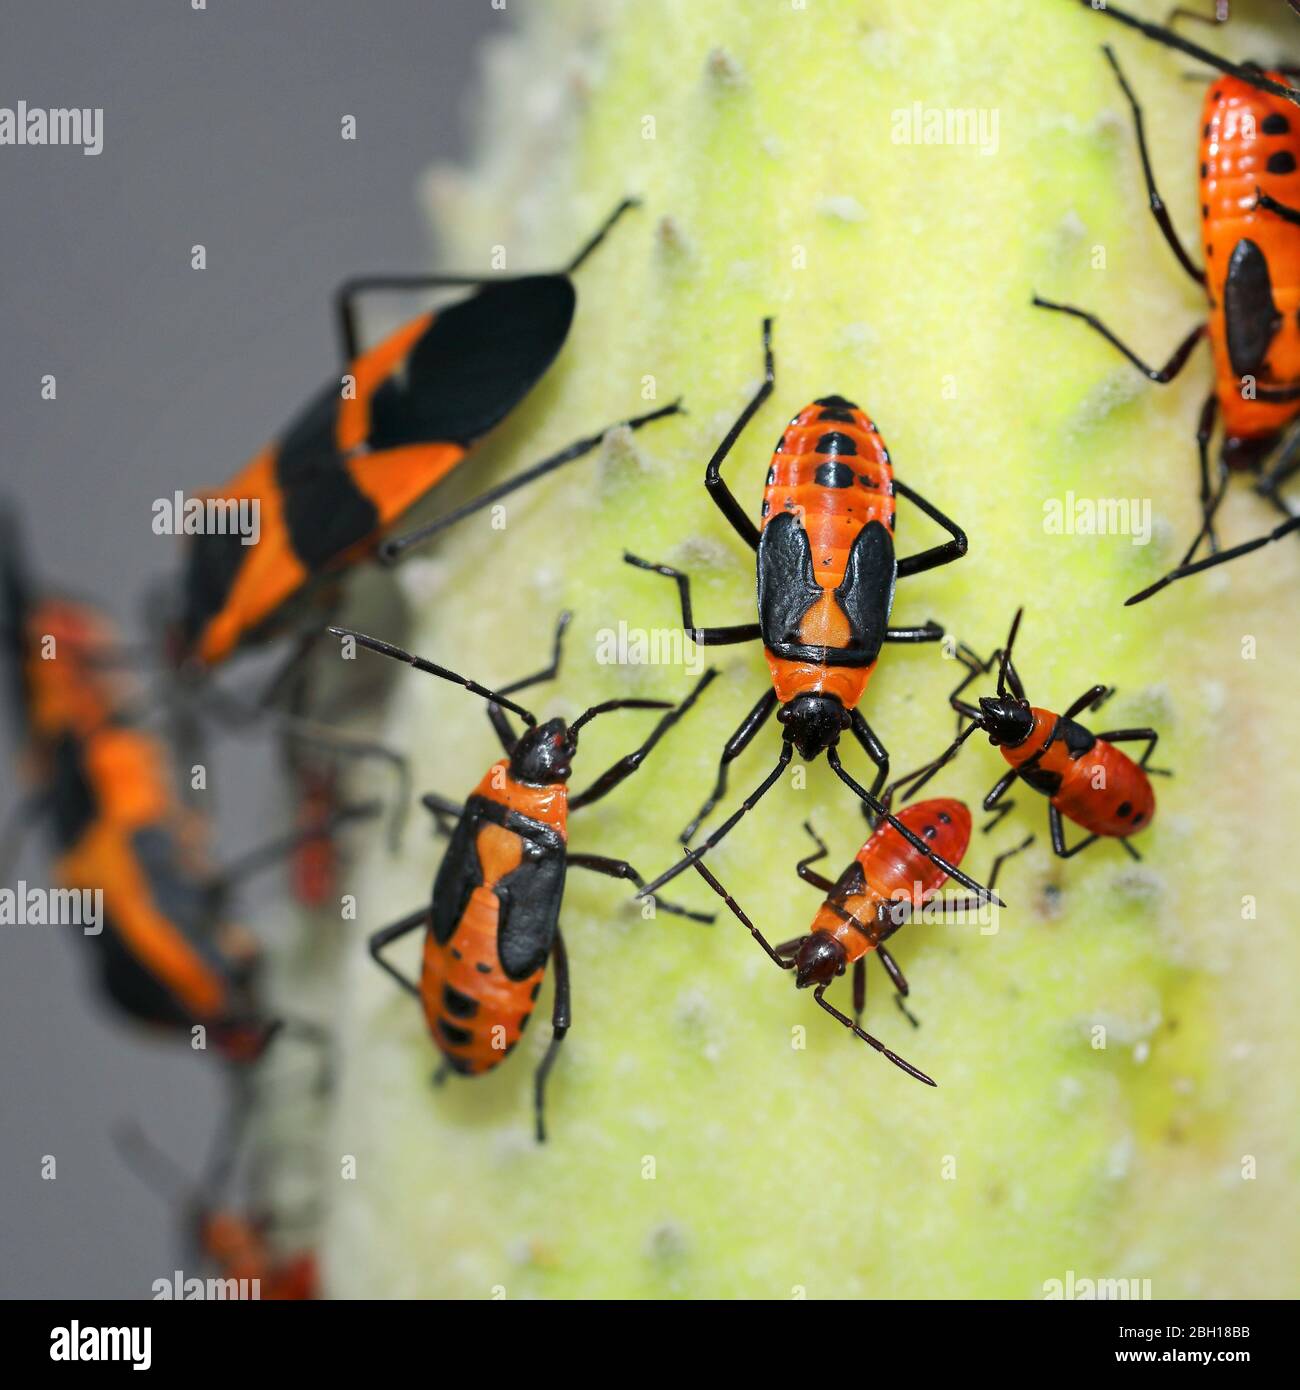 red bugs & stainers, pyrrhocorid bugs, pyrrhocores (Pyrrhocoridae), imagos and larvae on a leaf, Canada, Ontario, Point Pelee National Park Stock Photo